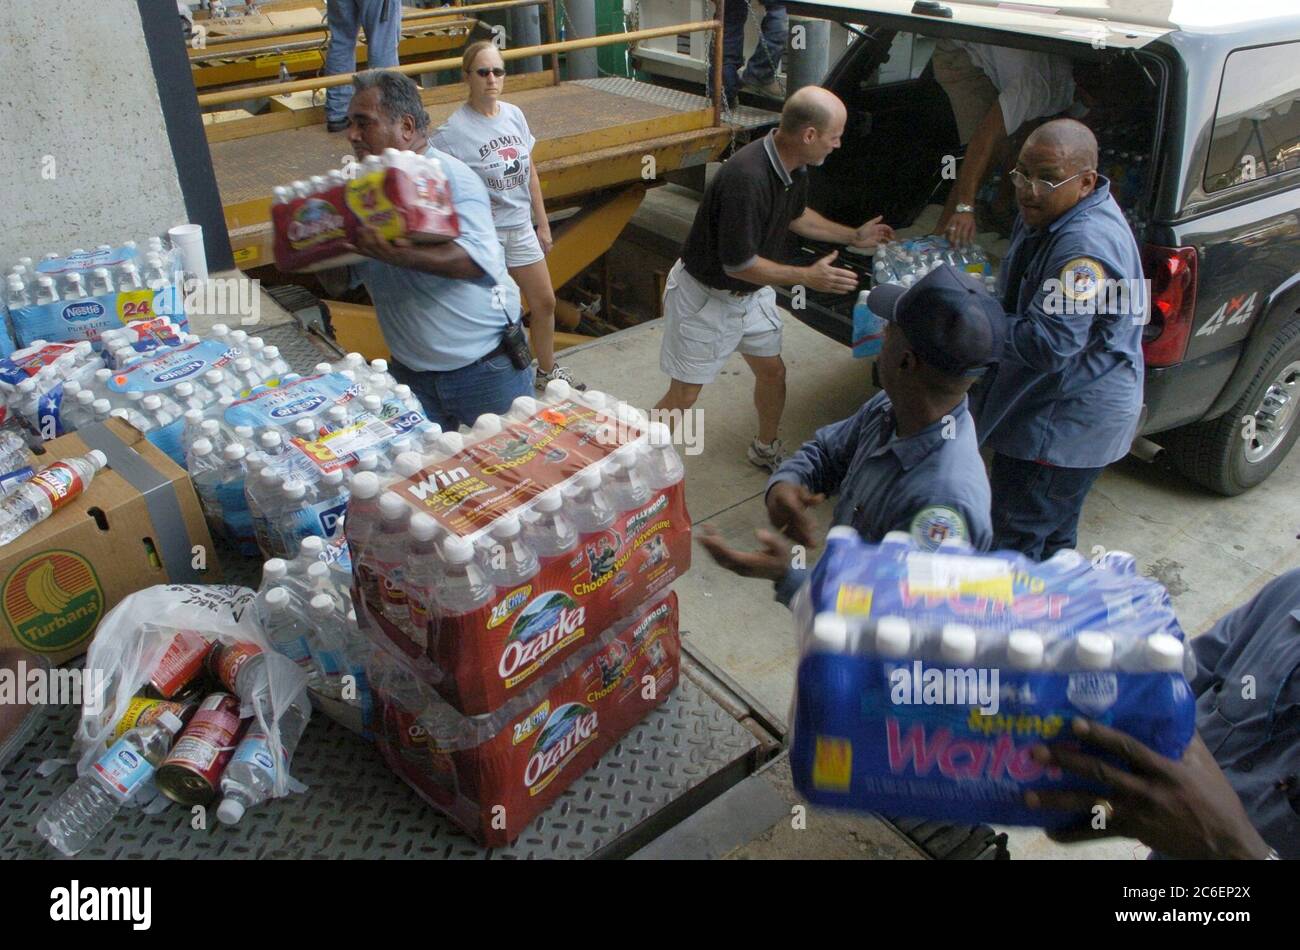 Austin, Texas September 3, 2005: Refugees from Hurricane Katrina continue to pour into Texas shelters including the Austin Convention Center, which is expecting over 5,000 people in the next three days.  City of Austin employees unload bottled water for refugees. ©Bob Daemmrich/ Stock Photo